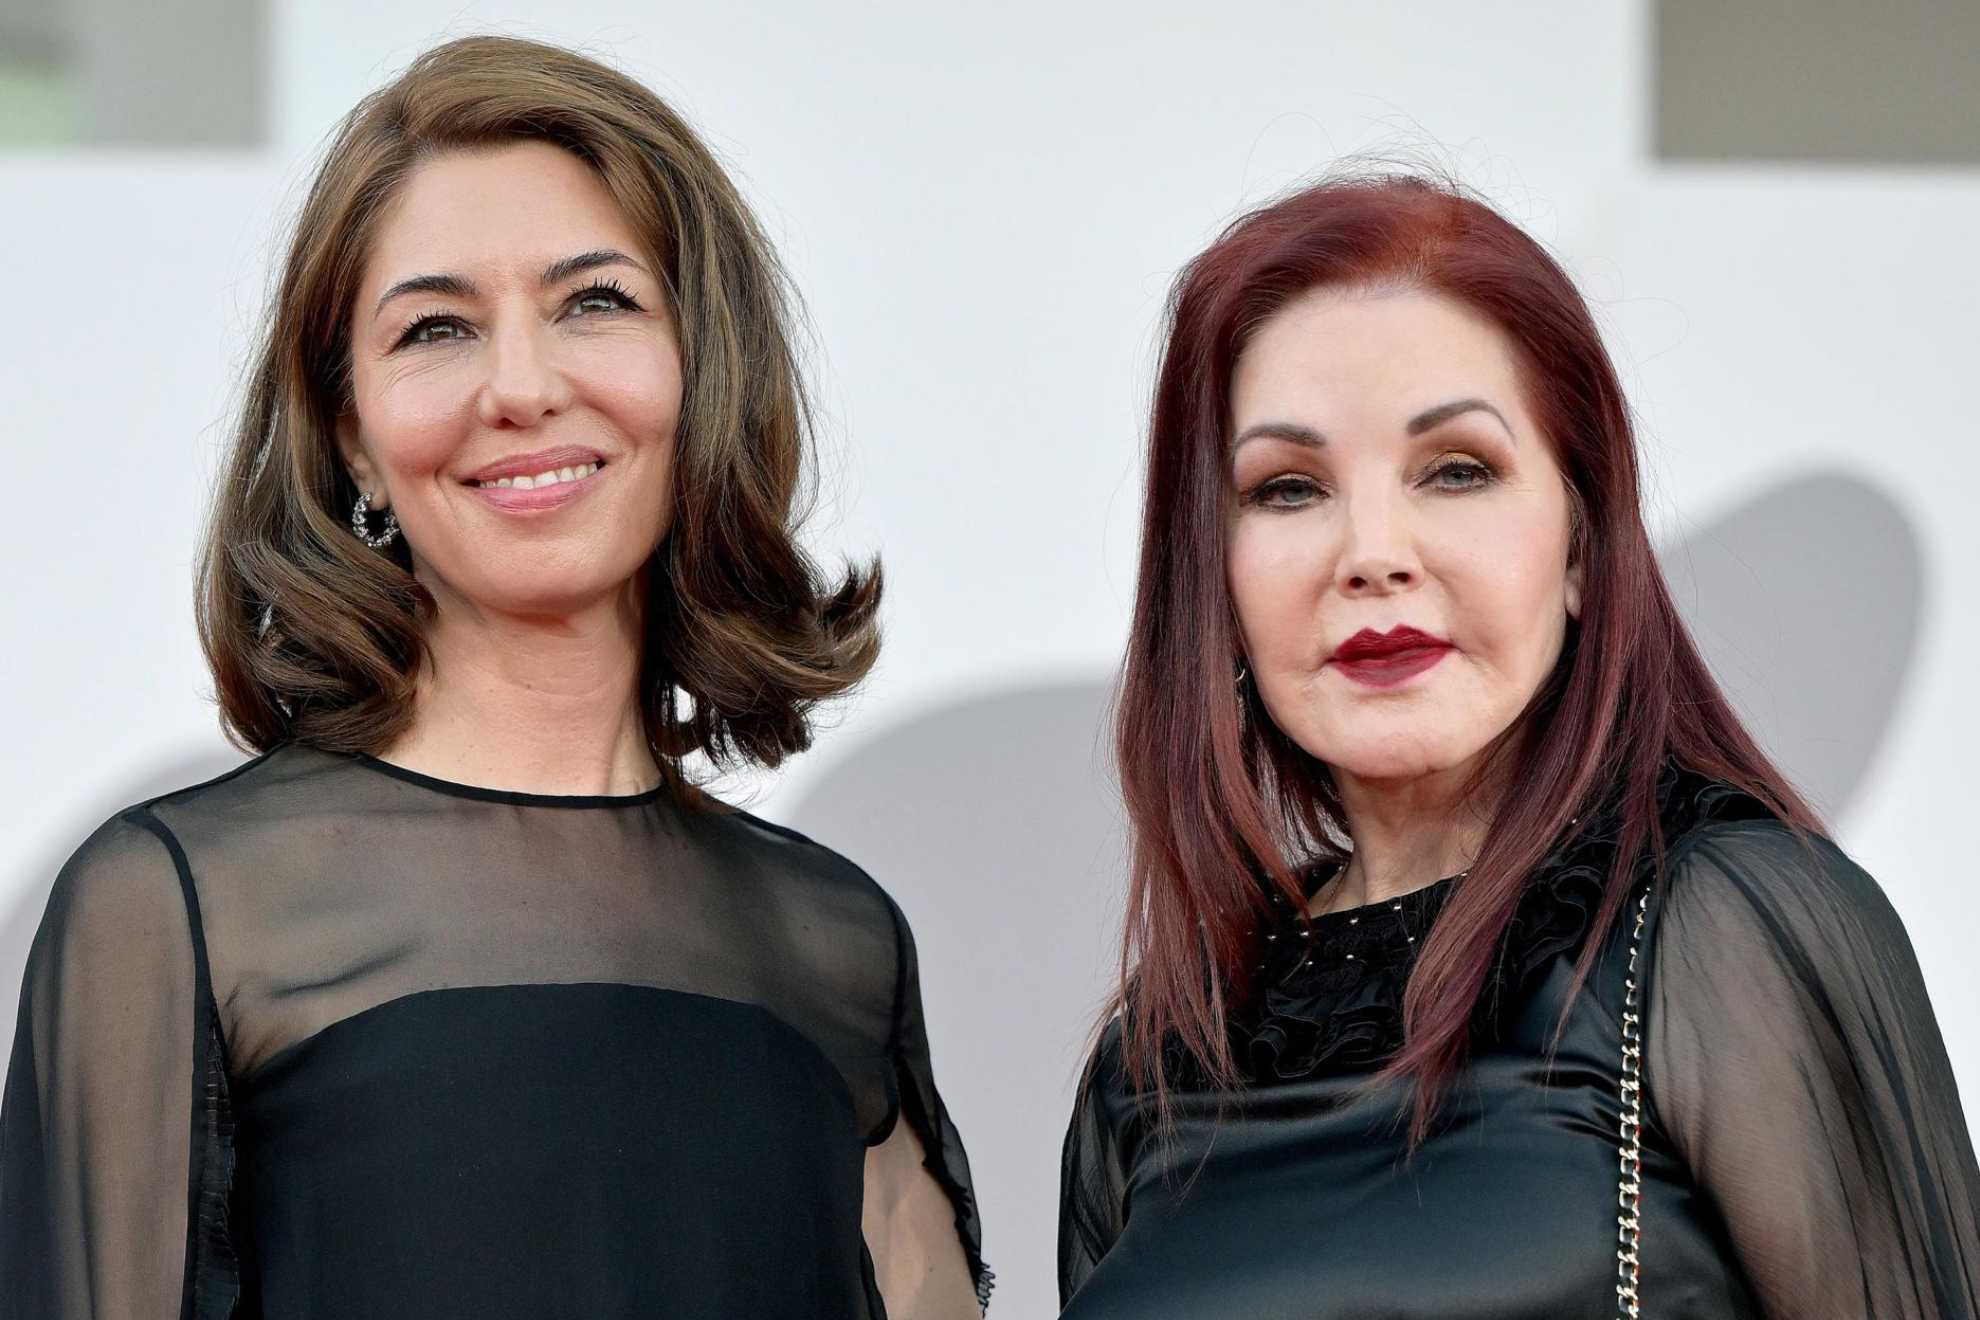 Sofia Coppola and Priscilla Presley, the mother of Lisa Marie Presley